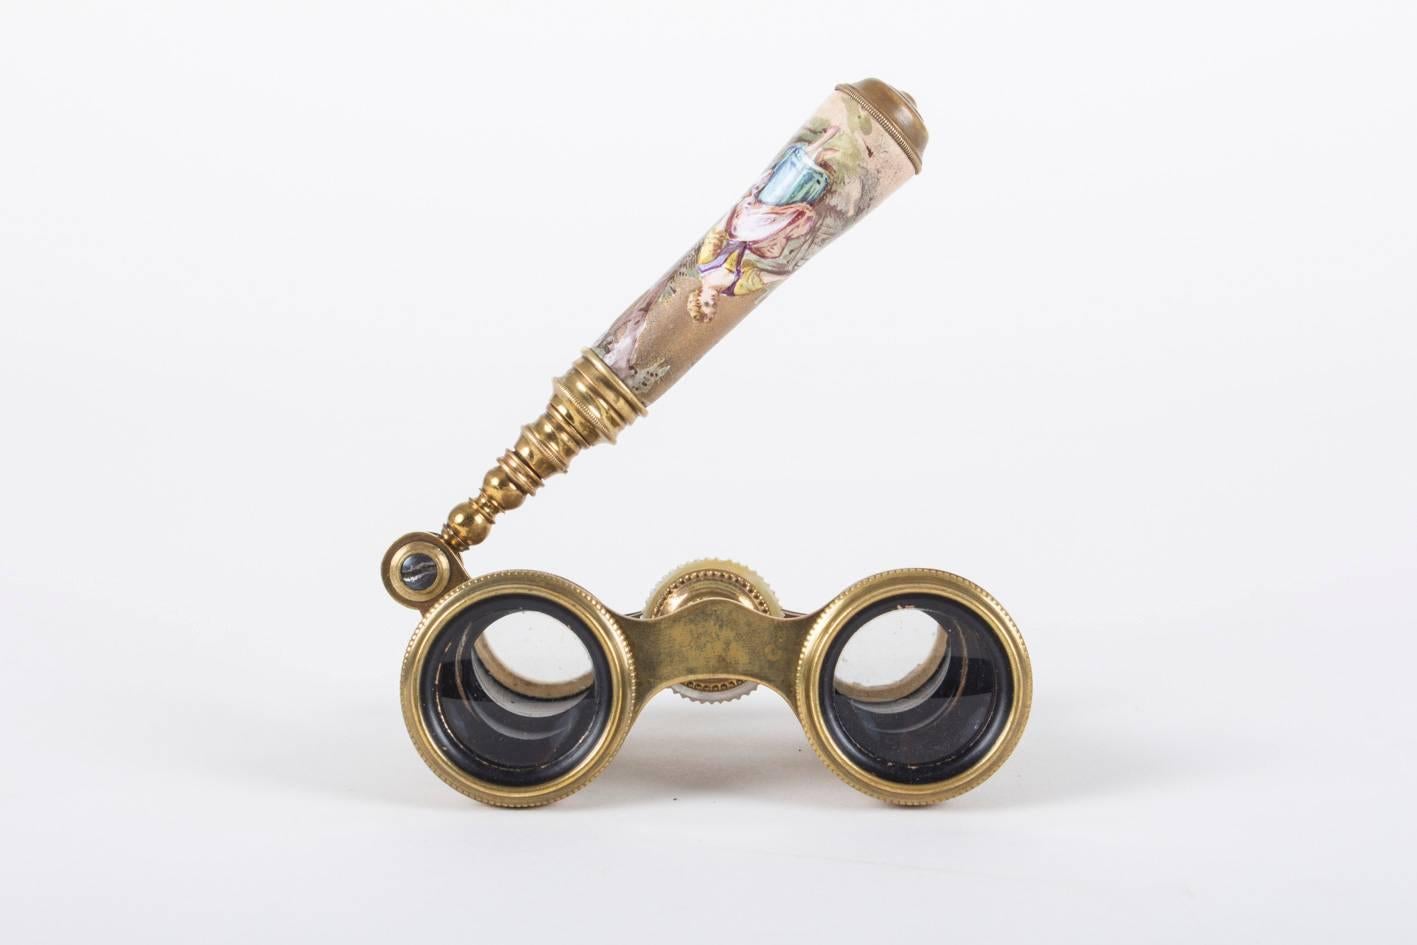 Elegant and fine, circa 1880-1900, French kiln-fired enamel opera glasses or binoculars in smaller size for ballet, etc.

This one is enameled on both barrels and also the barrel of the expanding lorgnette handle, the set has not a bit of loss to